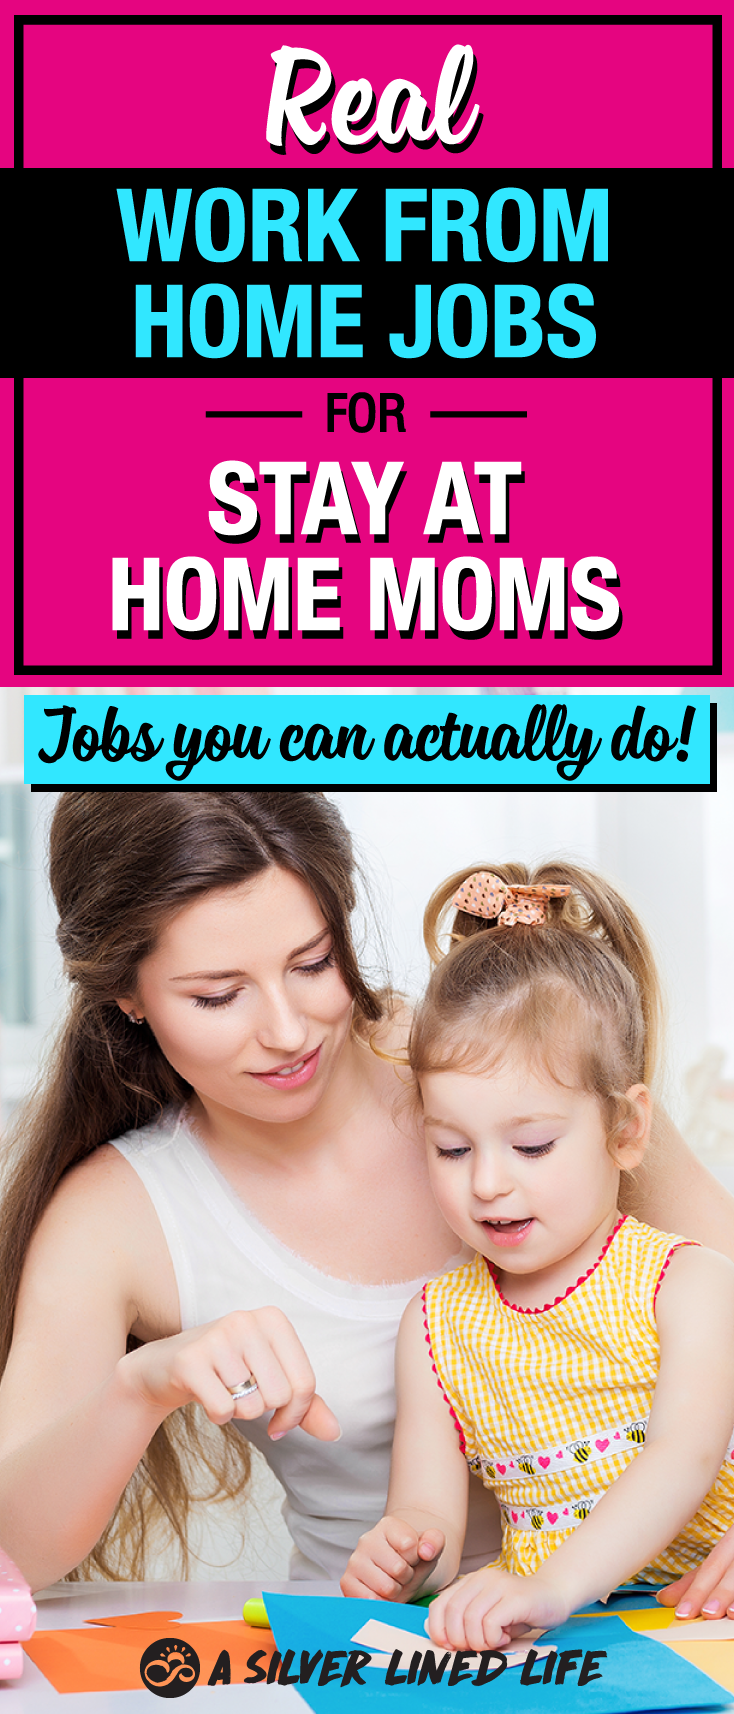 Stay at home mom jobs where you can extra money from home. The ULTIMATE list of ideas for work from home jobs for moms. These are real jobs you can actually do, make good money and stay at home with your babies. #SLL #SAHM #workfromhome